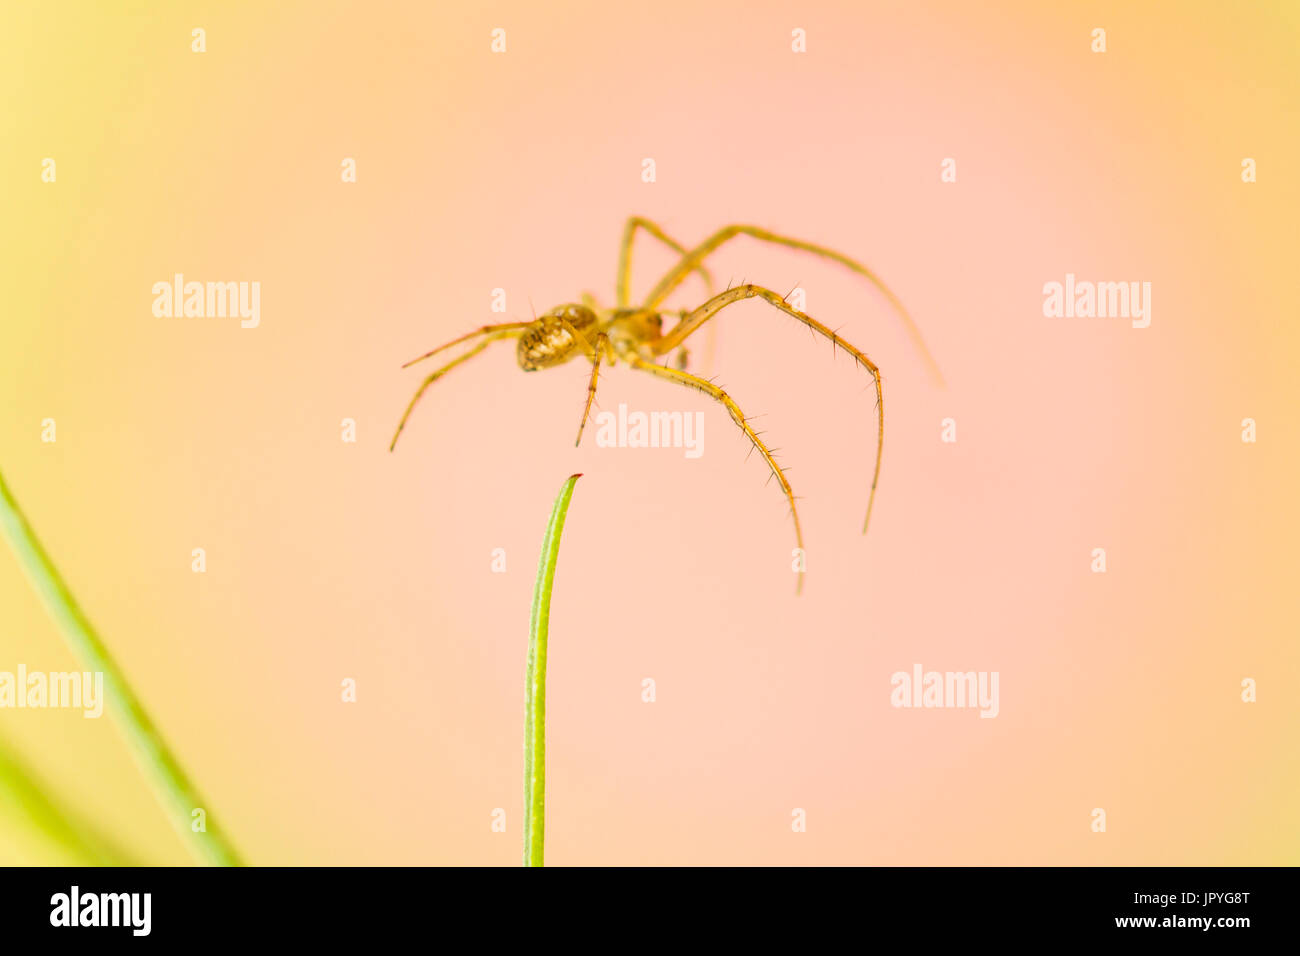 Spider suspended - Alsace France Stock Photo